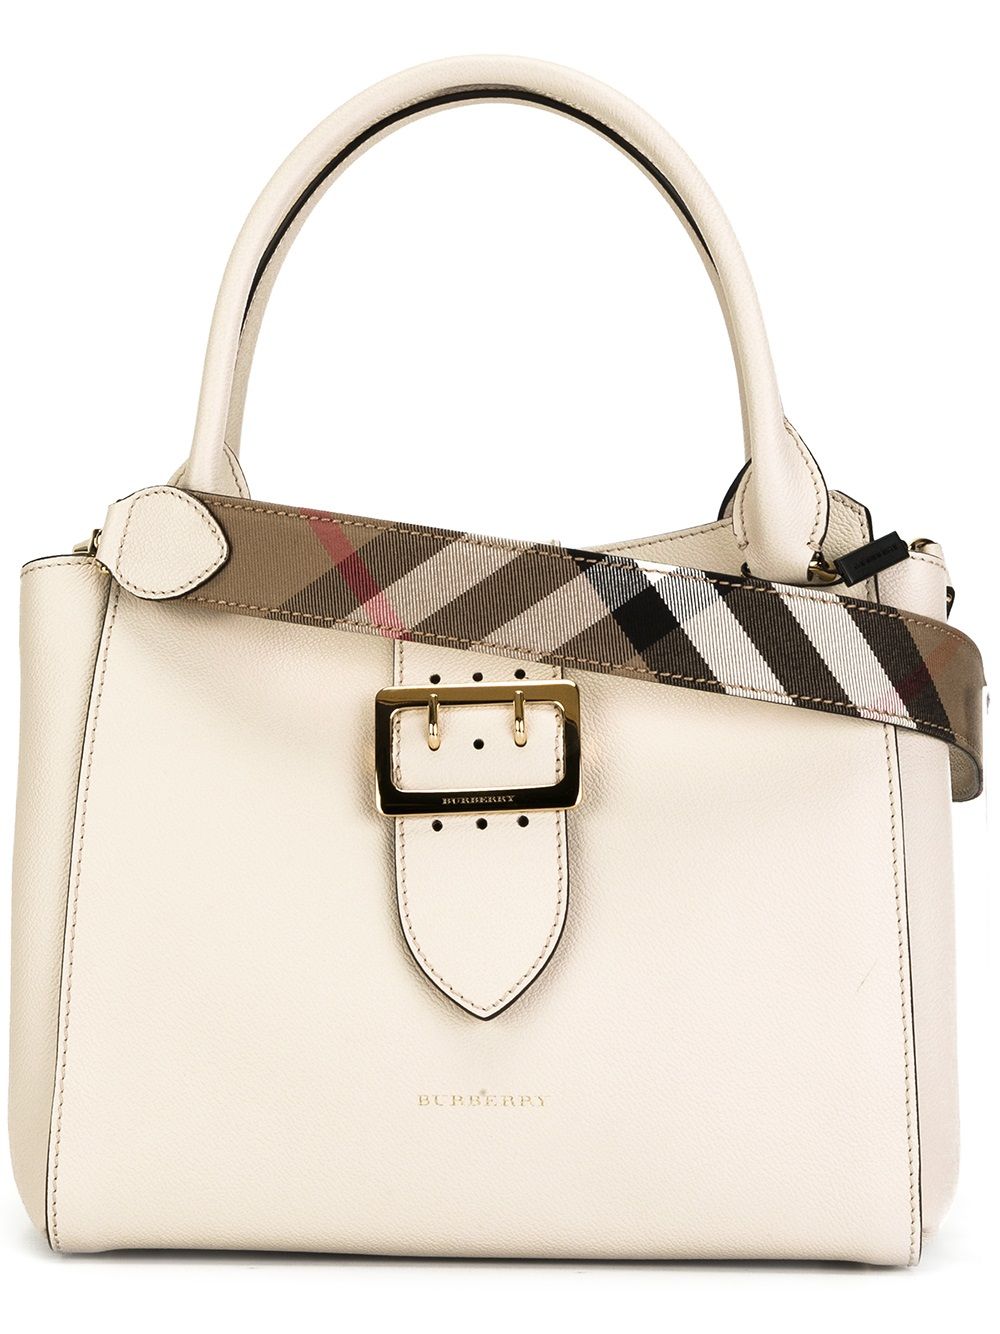 Burberry The Medium Buckle Tote In Grainy Leather - Farfetch